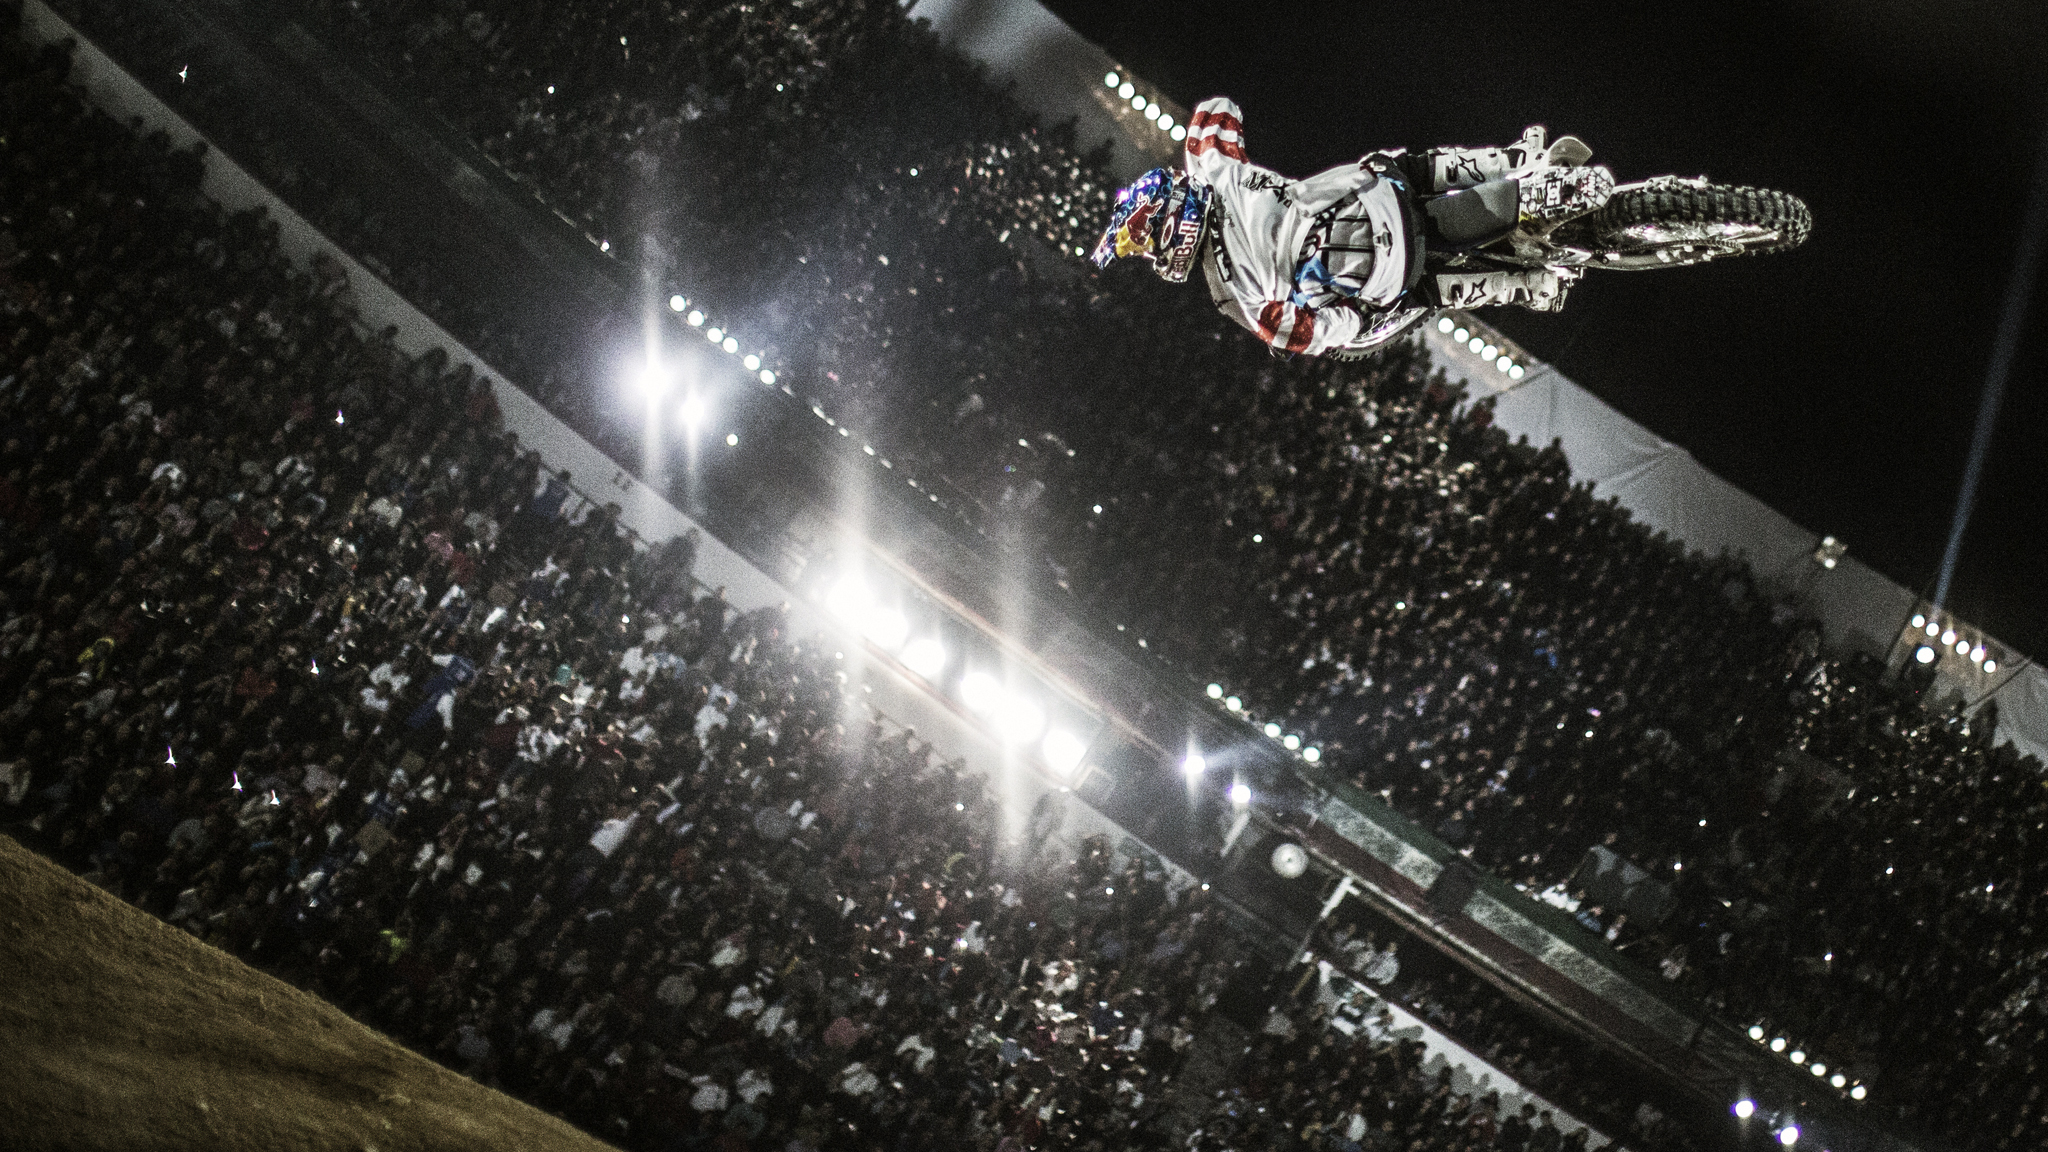 Tom Pagès named Best International FMX Rider in annual FMX Awards